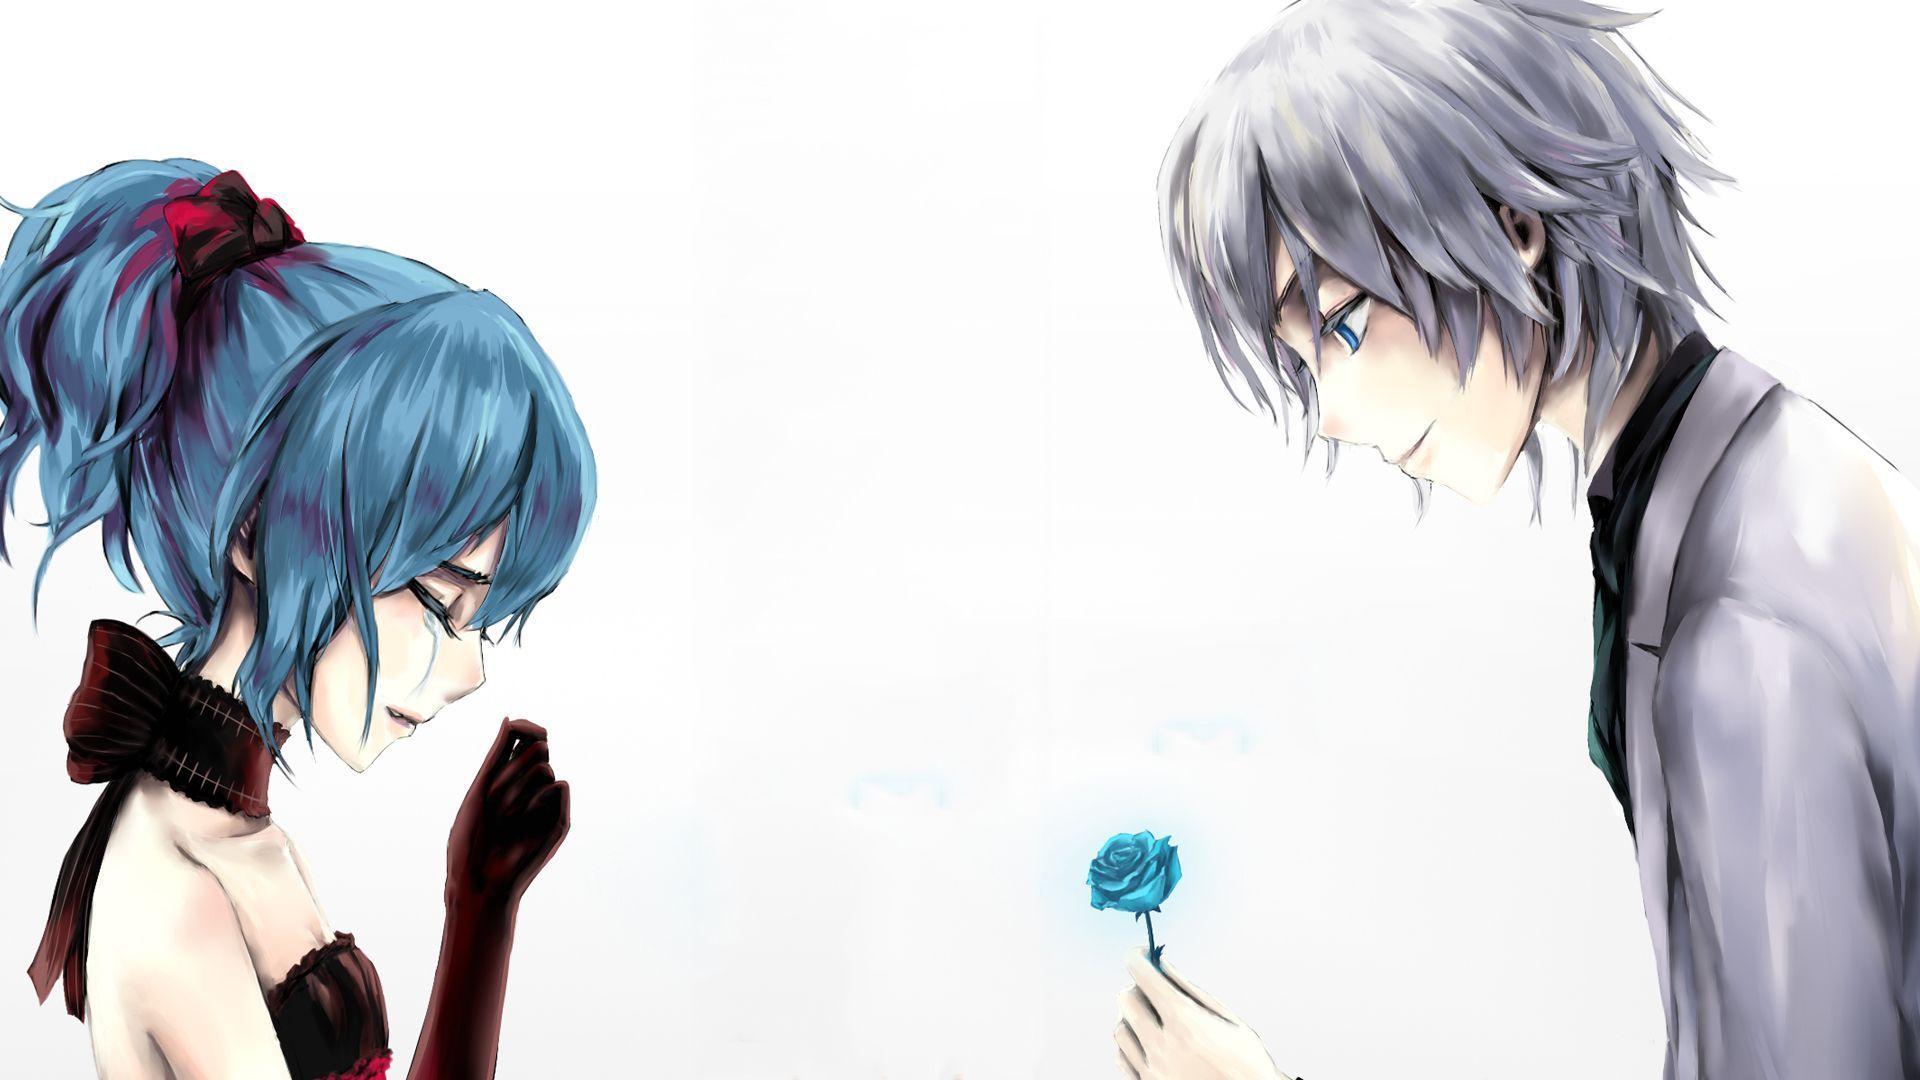 Anime Love Couple Boy Giving Rose to Cry Girl Wallpapers